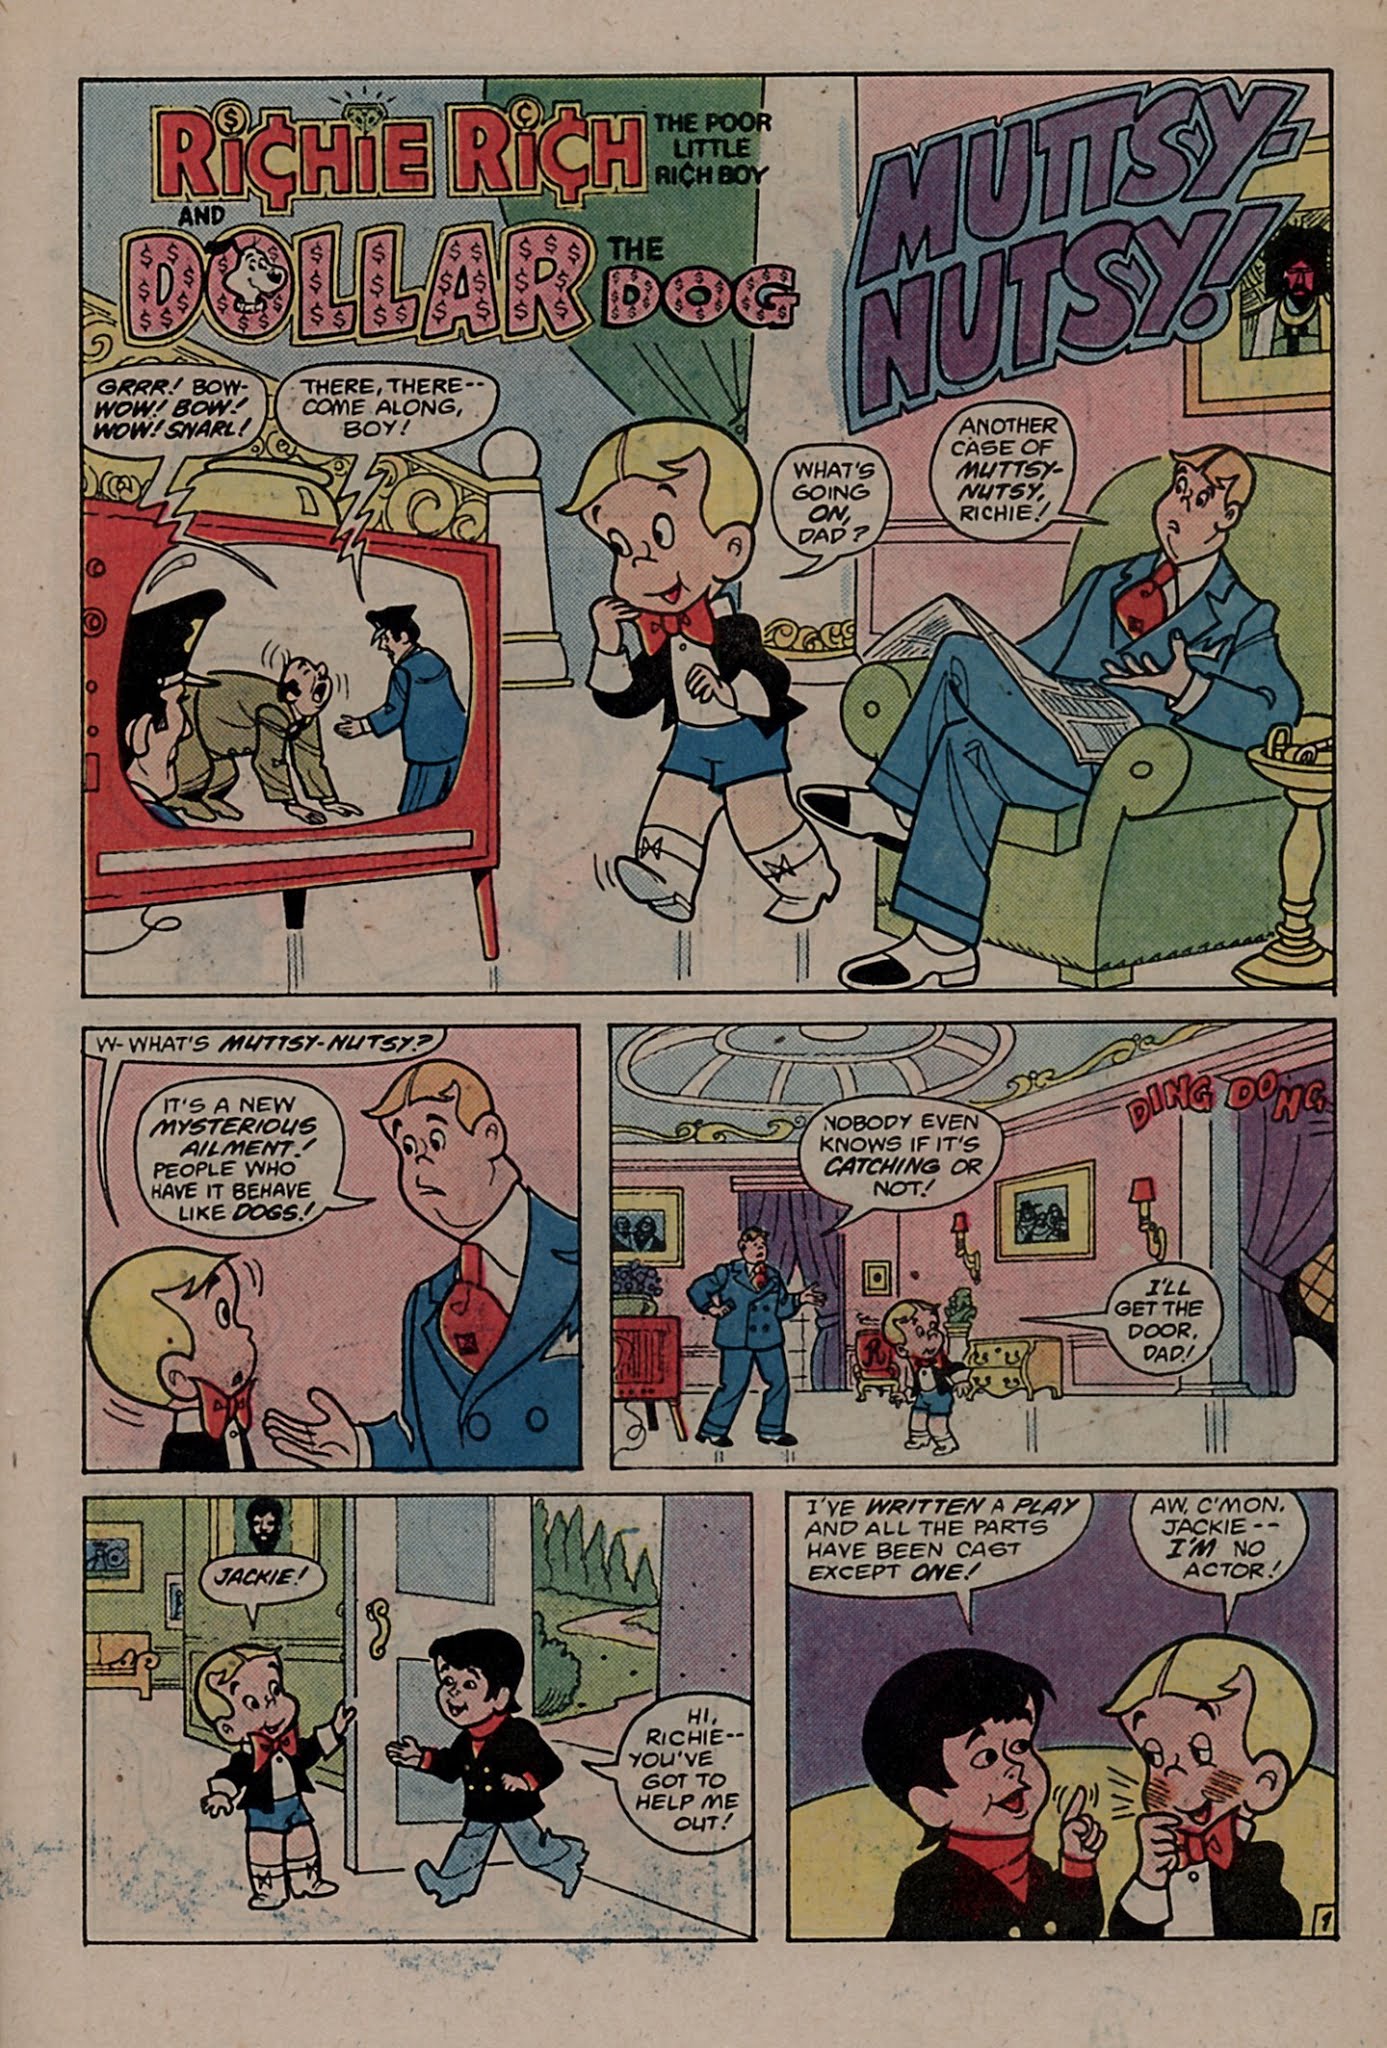 Read online Richie Rich & Dollar the Dog comic -  Issue #9 - 19